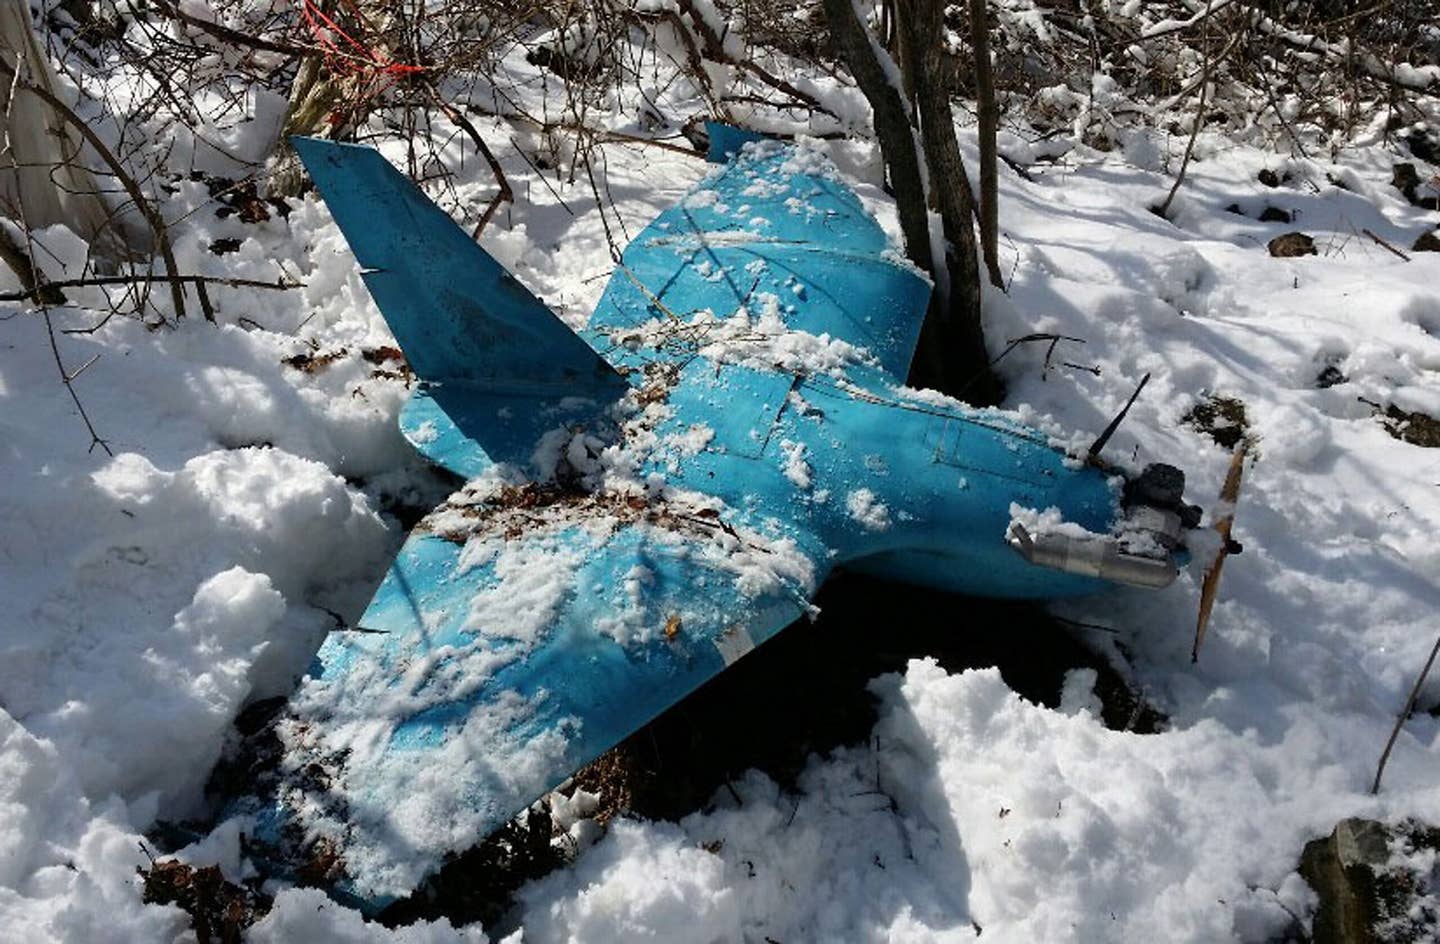 In this handout image provided by the South Korean Defense Ministry, the wreckage of a crashed drone is seen on a mountain on April 6, 2014, in Samcheok, South Korea. Three drones, believed to be North Korean, have been found in South Korea in recent weeks. (Photo by Handout/South Korean Defense Ministry via Getty Images)